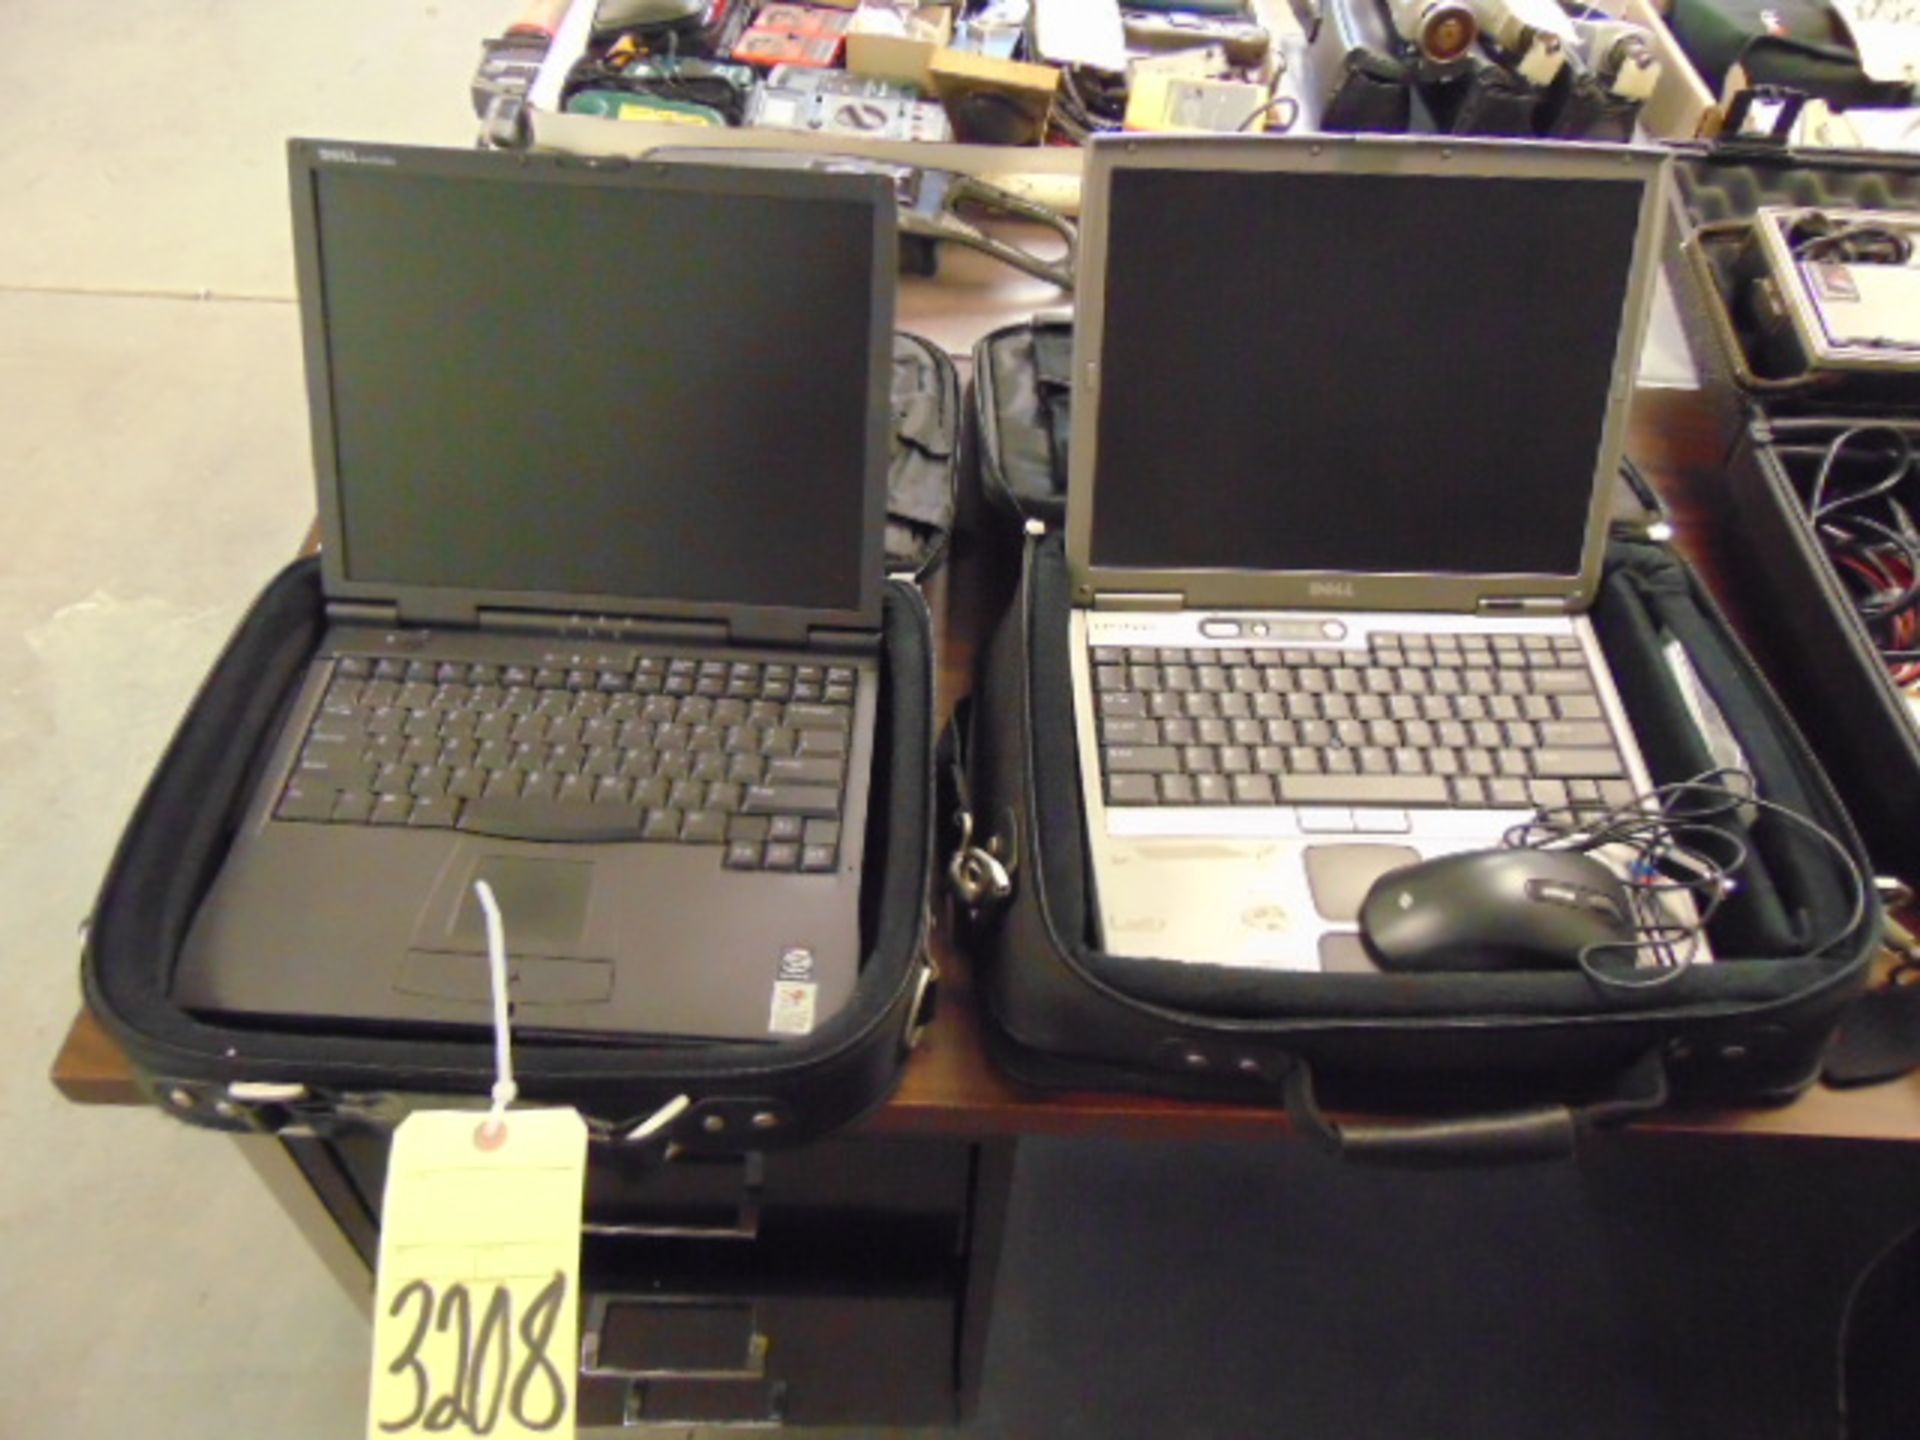 LOT OF LAPTOP COMPUTERS (2), assorted